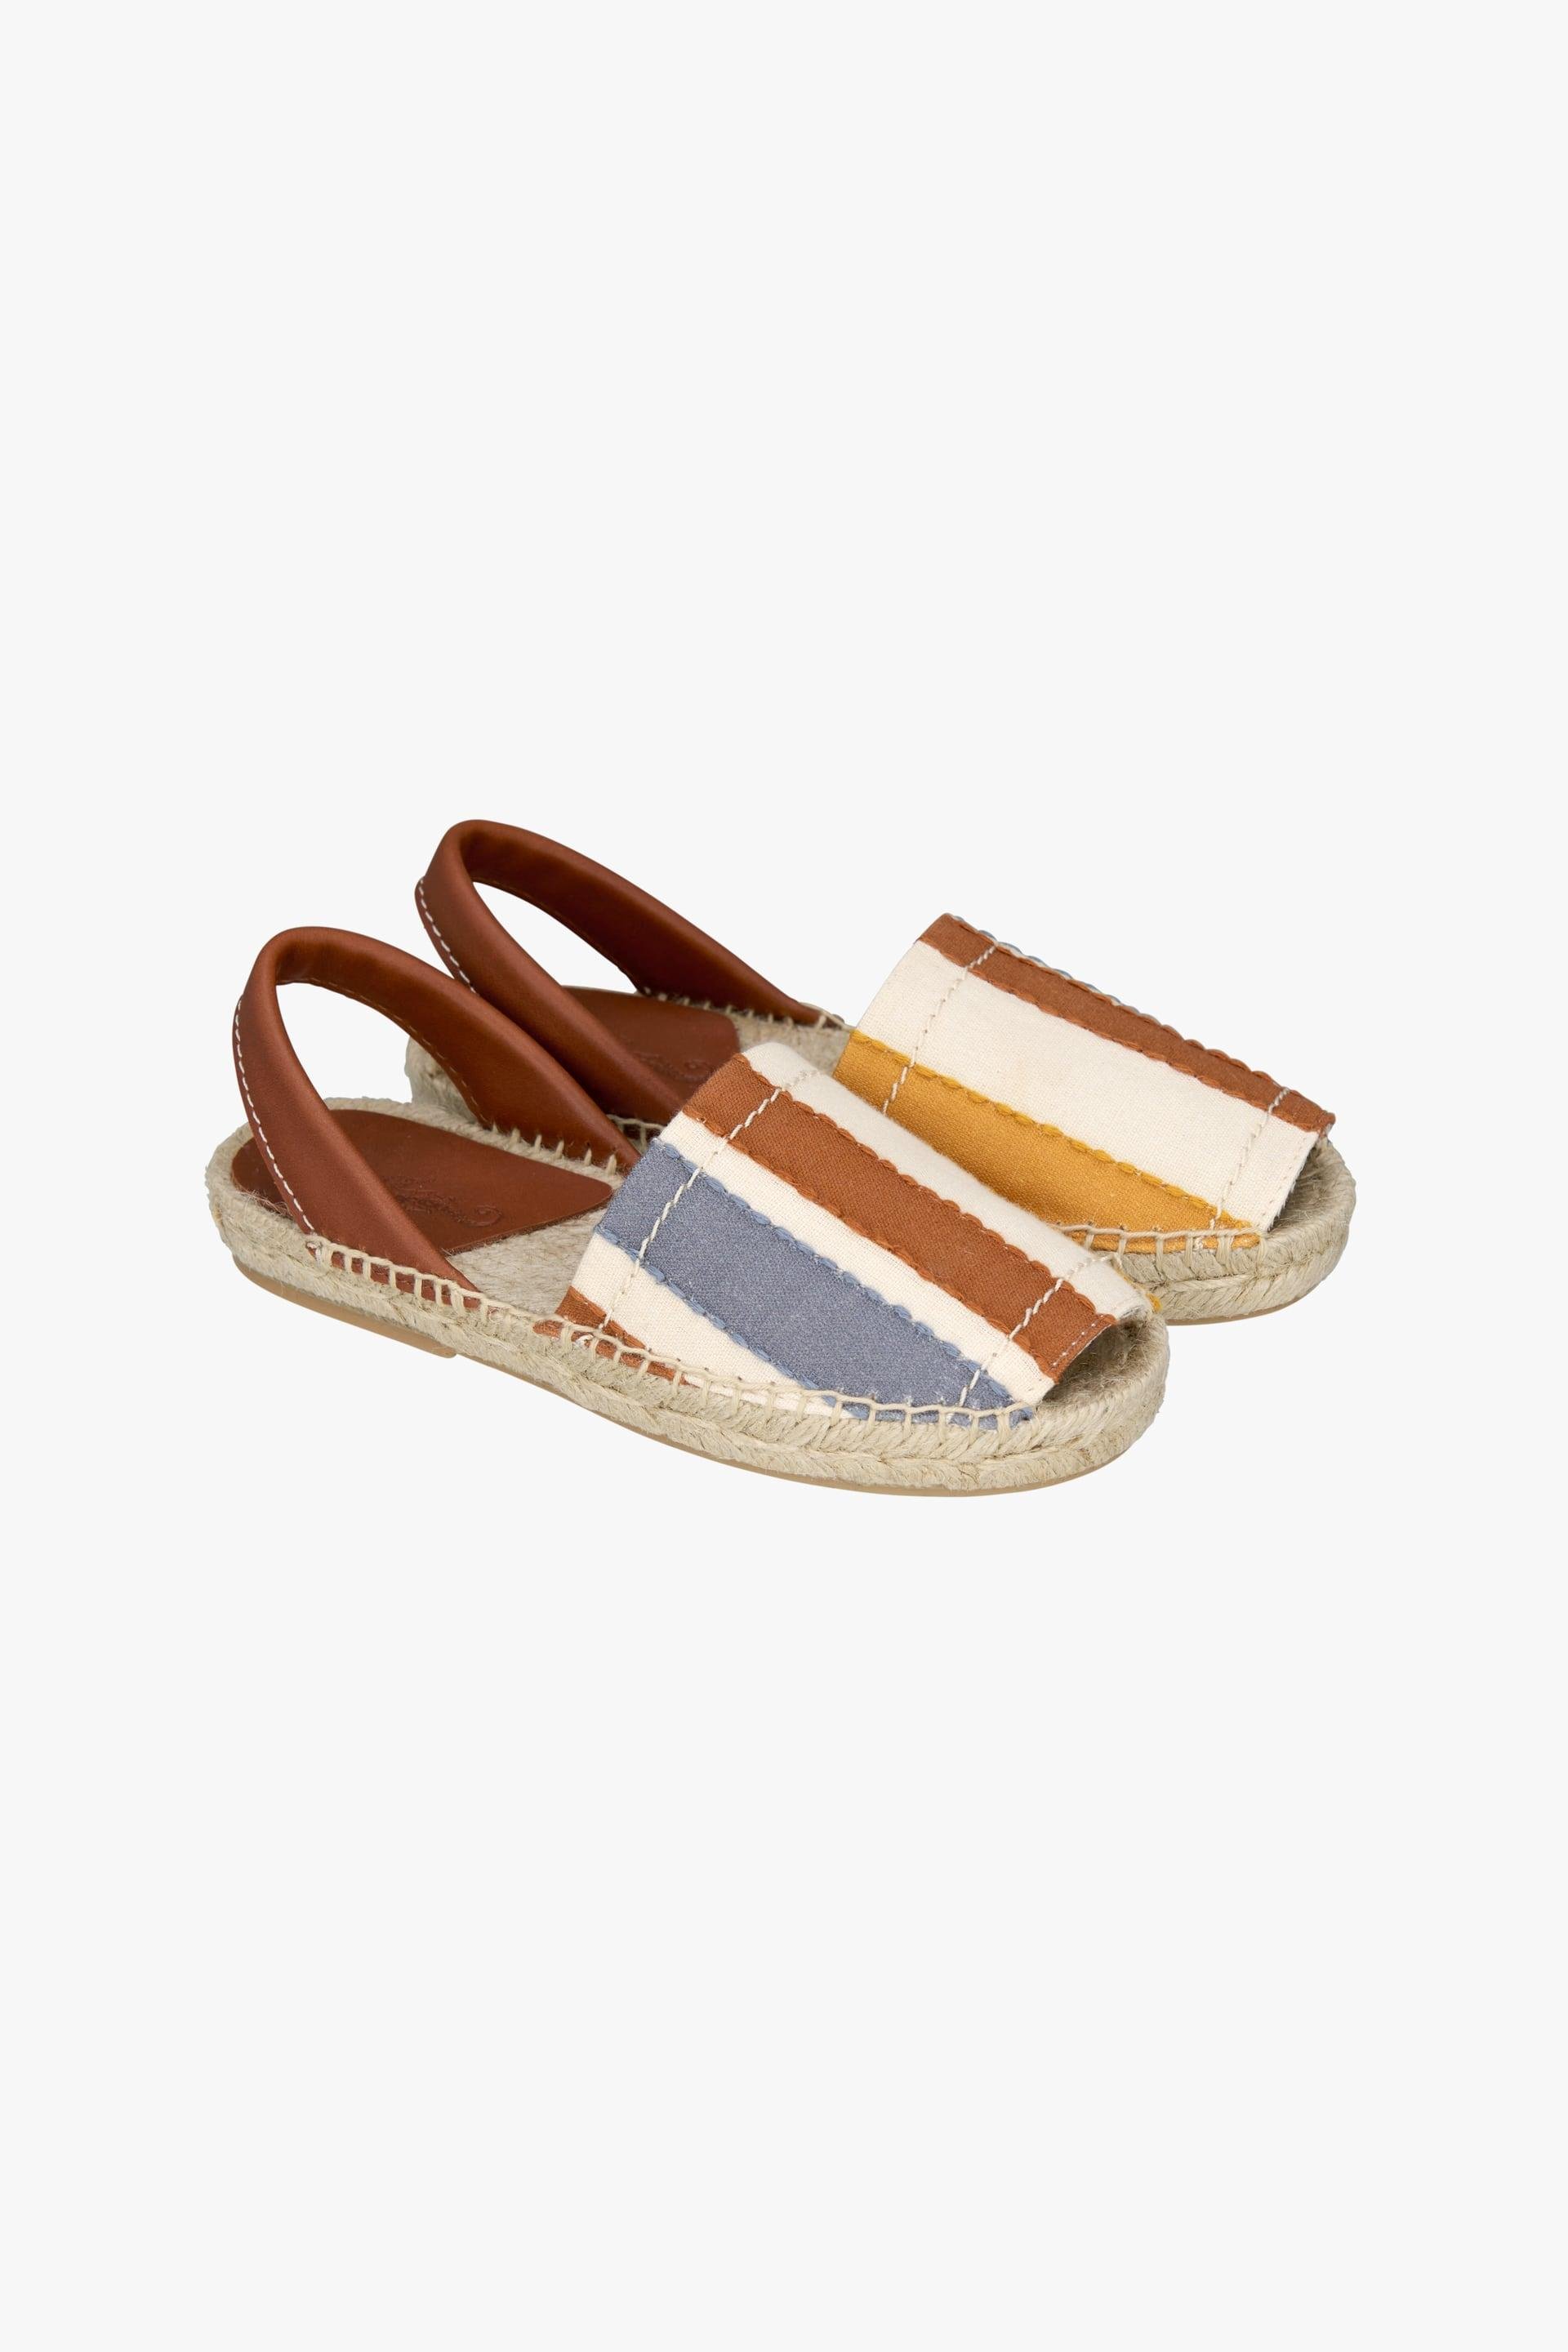 STRIPED SLINGBACK SANDALS LIMITED EDITION by ZARA